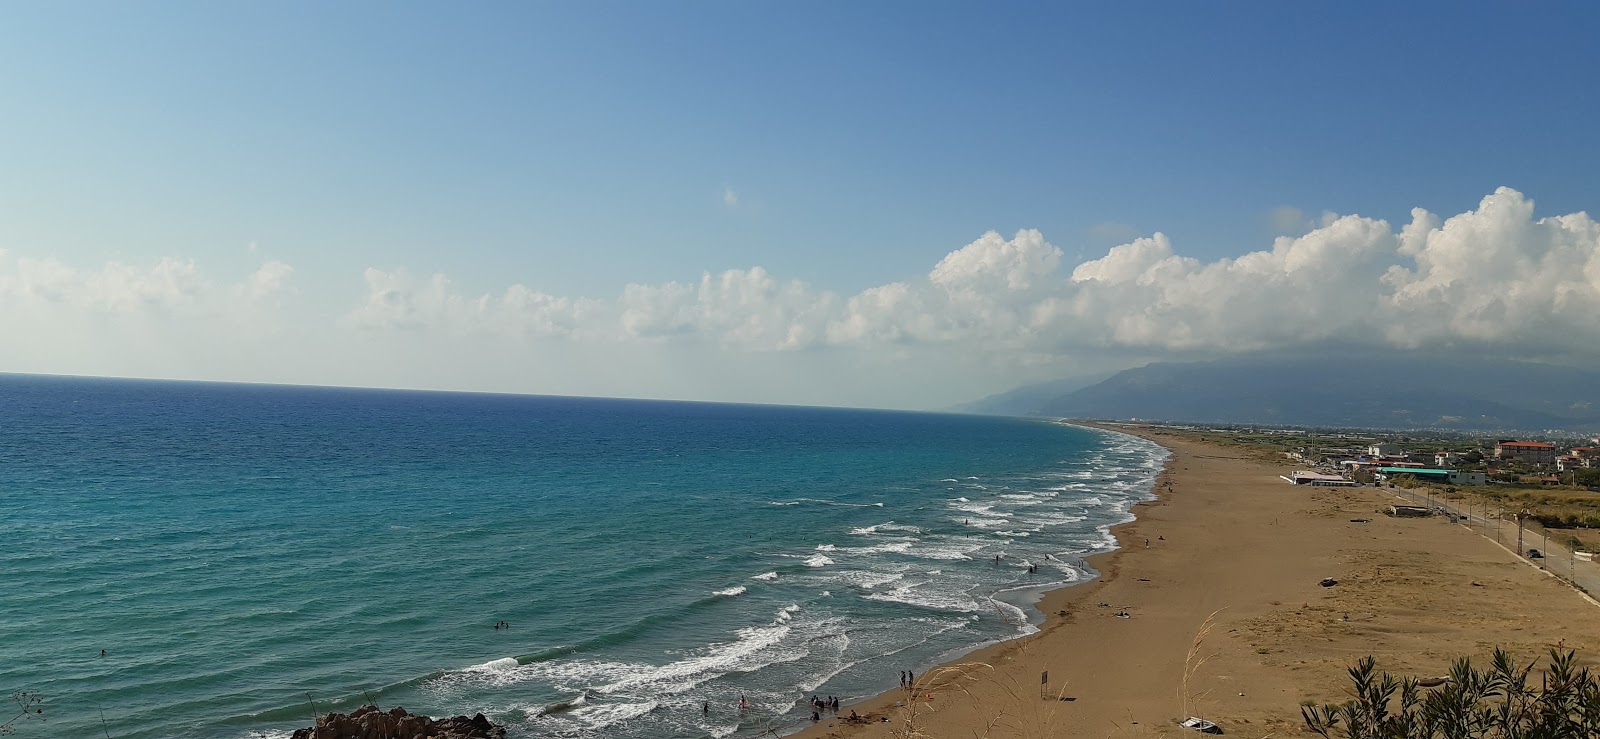 Photo of Meydan beach surrounded by mountains